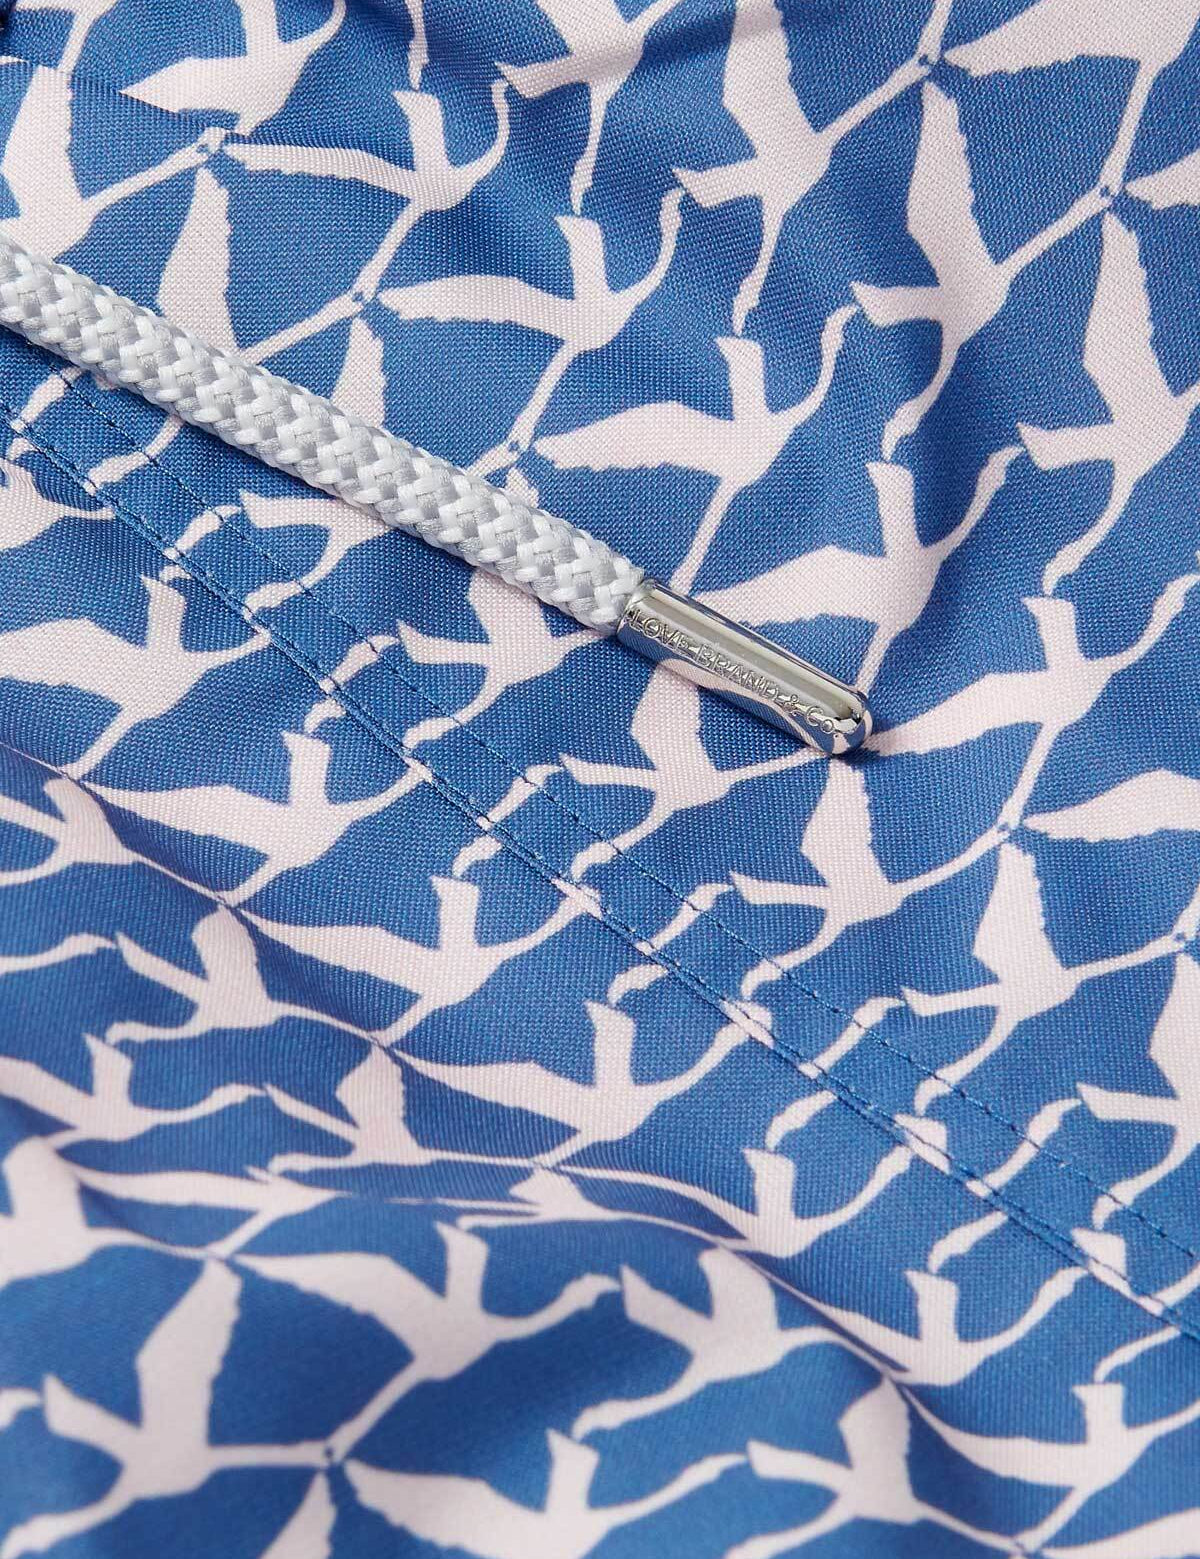 Close-up view of Men's Flamingo Flamboyance Staniel Swim Shorts featuring blue fabric with a white flamingo pattern and a drawstring with silver metal tips.